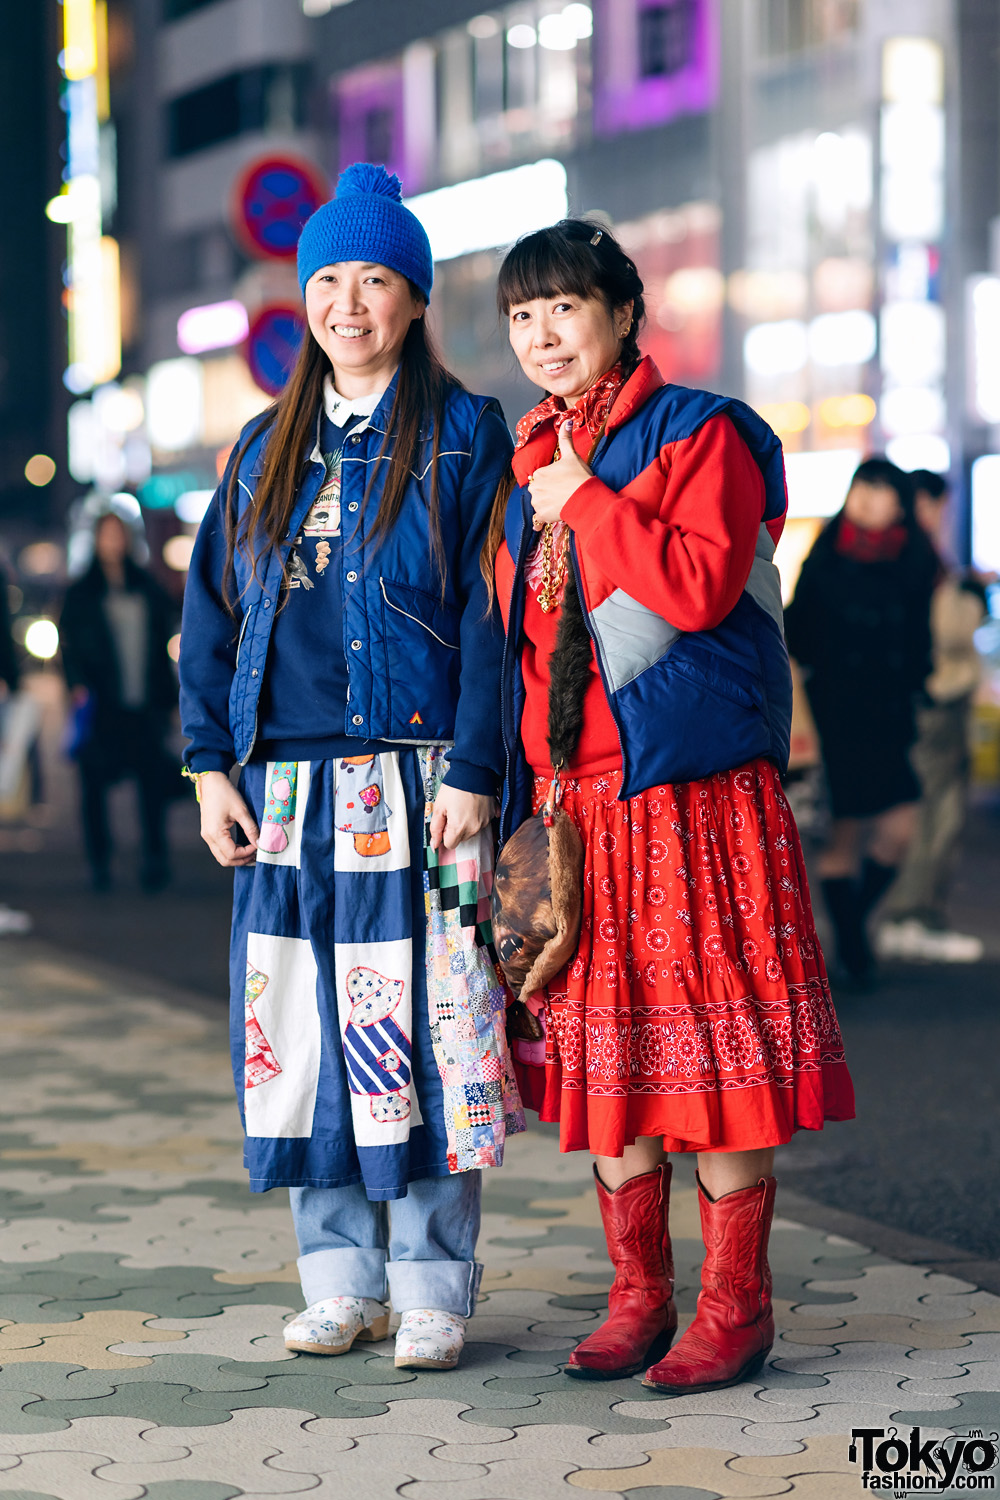 Harajuku Eclectic Street Styles w/ Pompom Beanie, Puffer Vest, Patchwork Skirt Over Jeans, Bandana Dress, Cowboy Boots, Floral Mules, Mickey Mouse Necklace & Star Wars Chewbacca Sling Bag